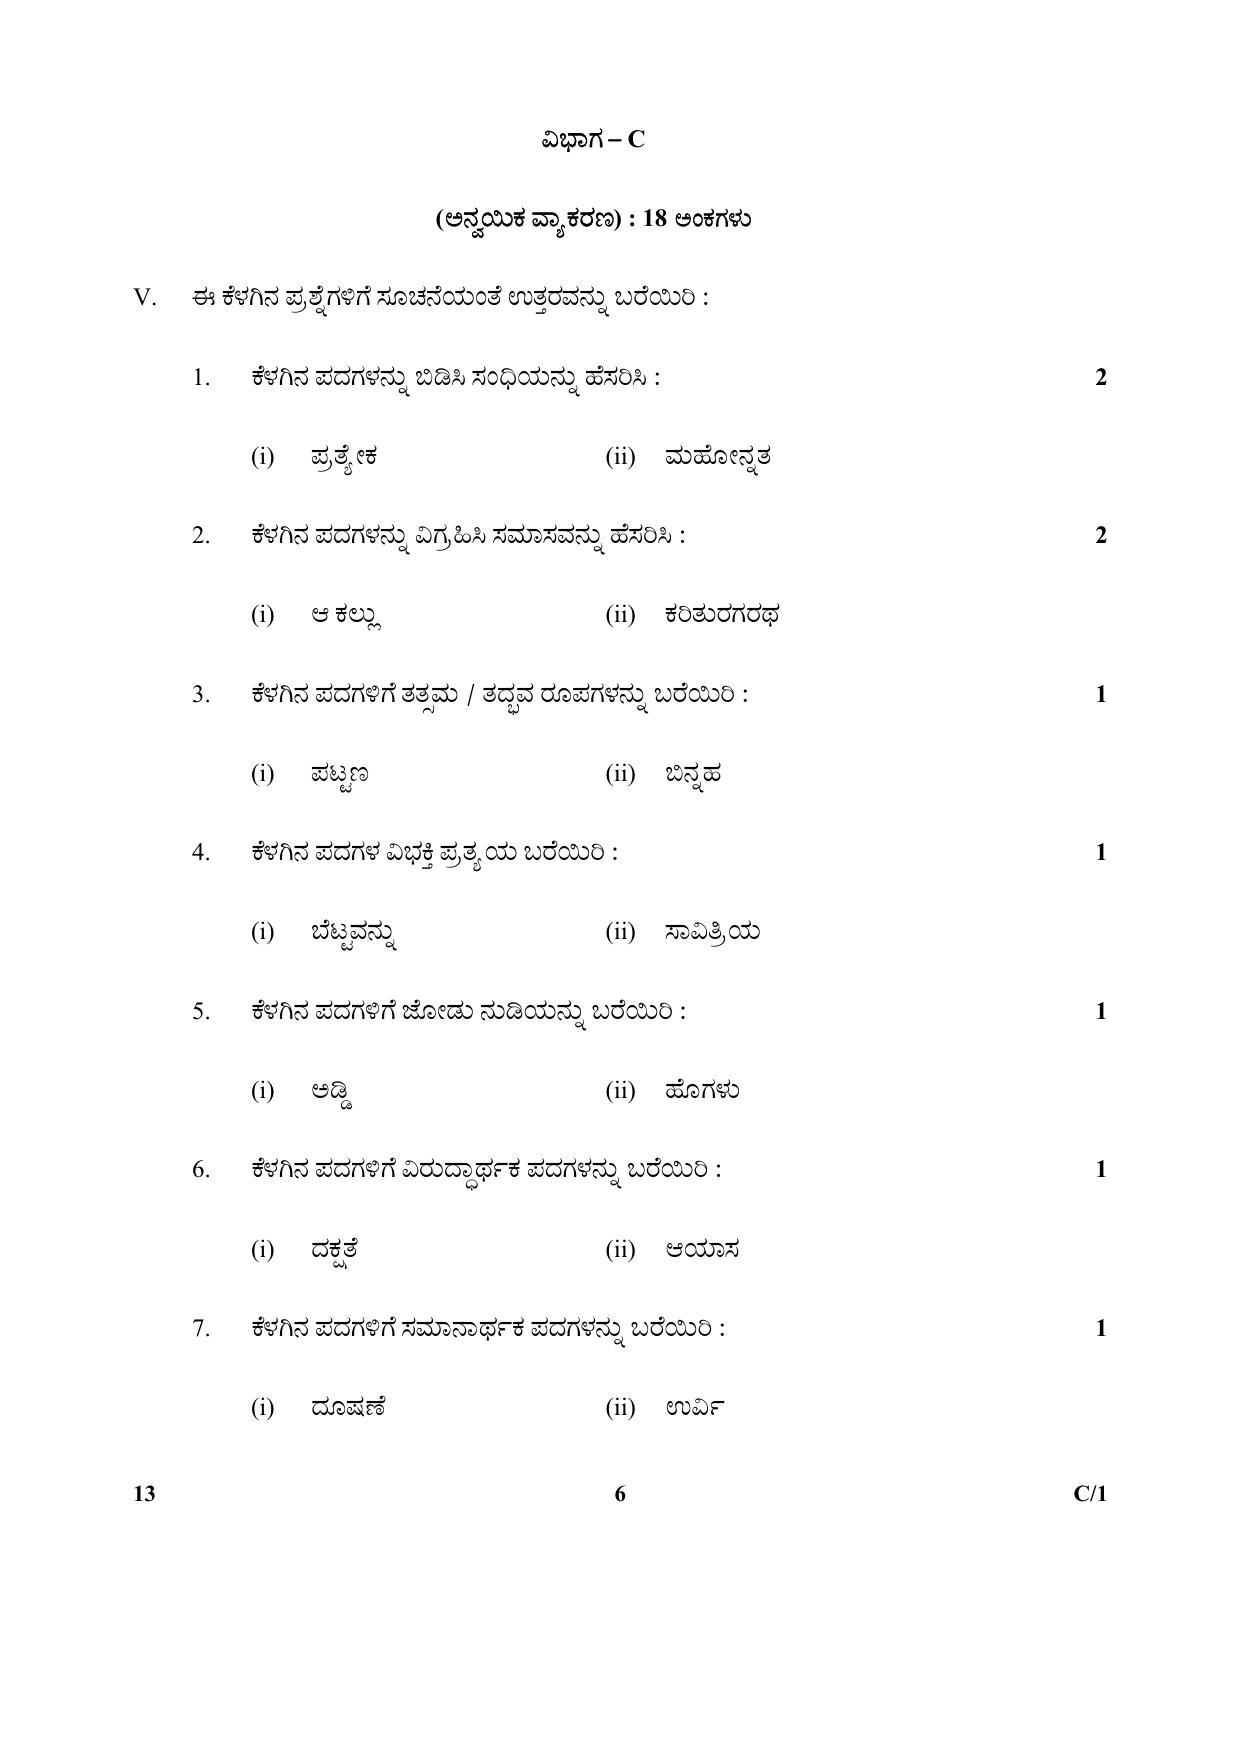 CBSE Class 10 13 (Kannada) 2018 Compartment Question Paper - Page 6